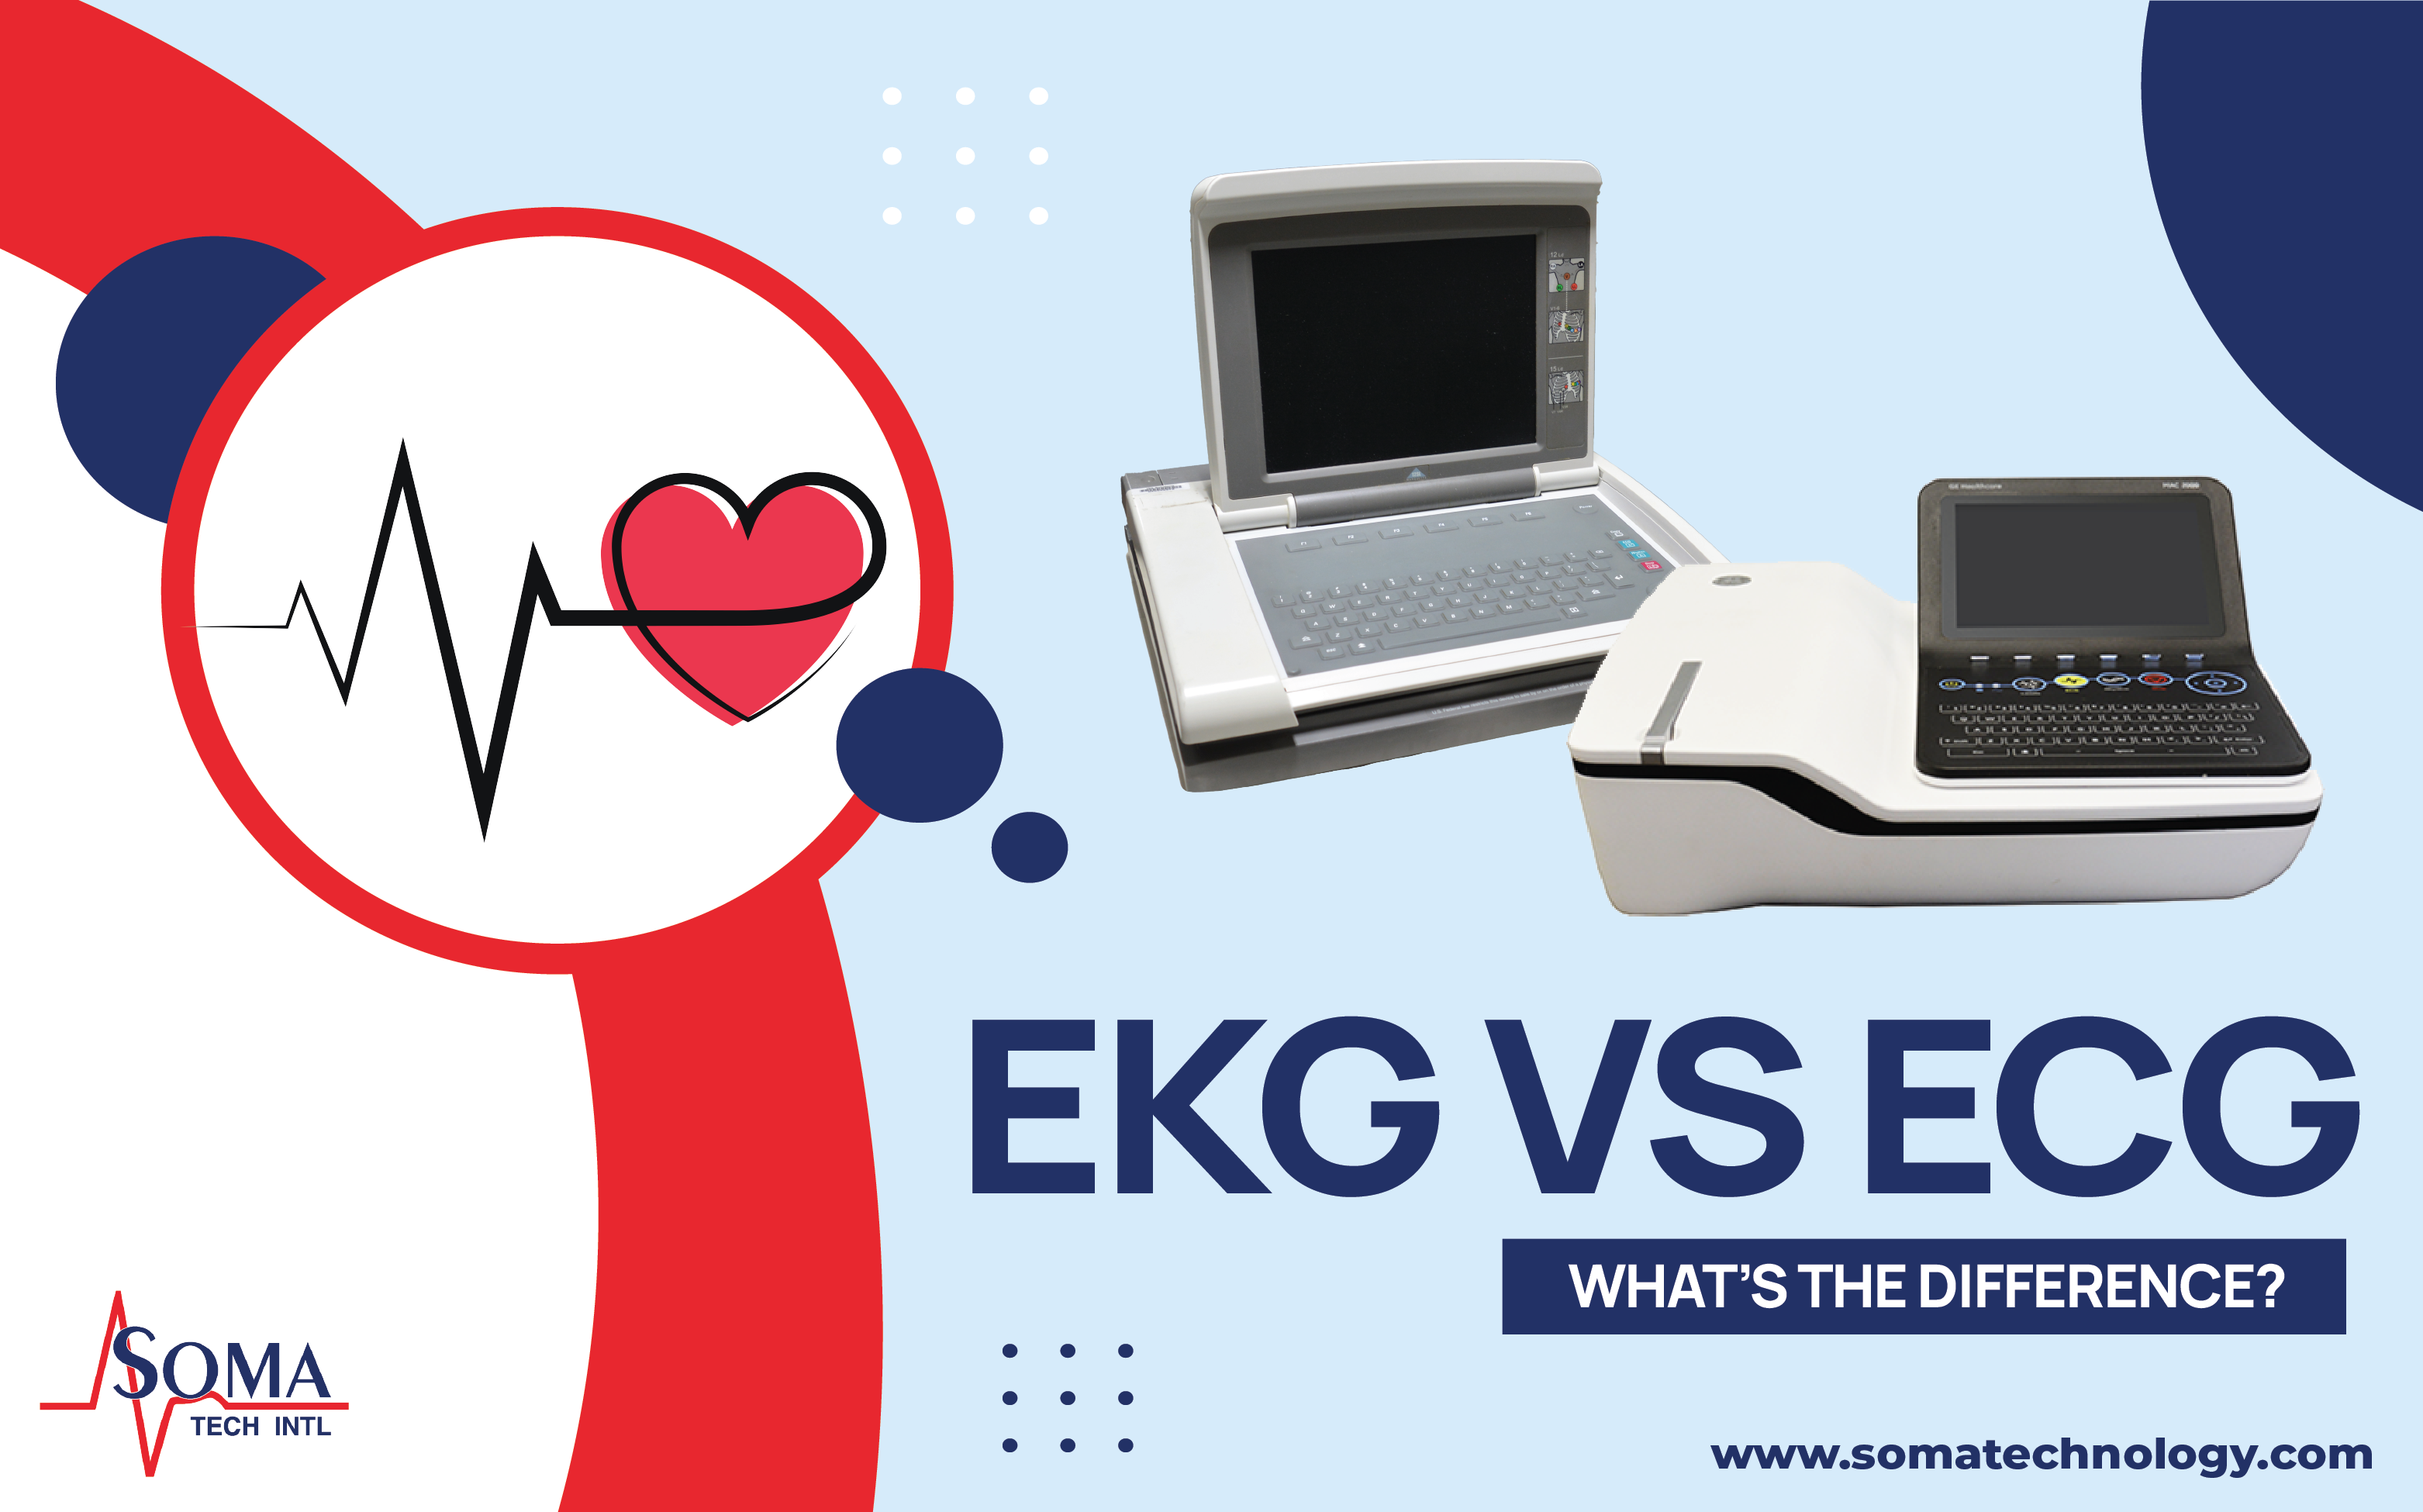 EKG vs ECG What's the difference